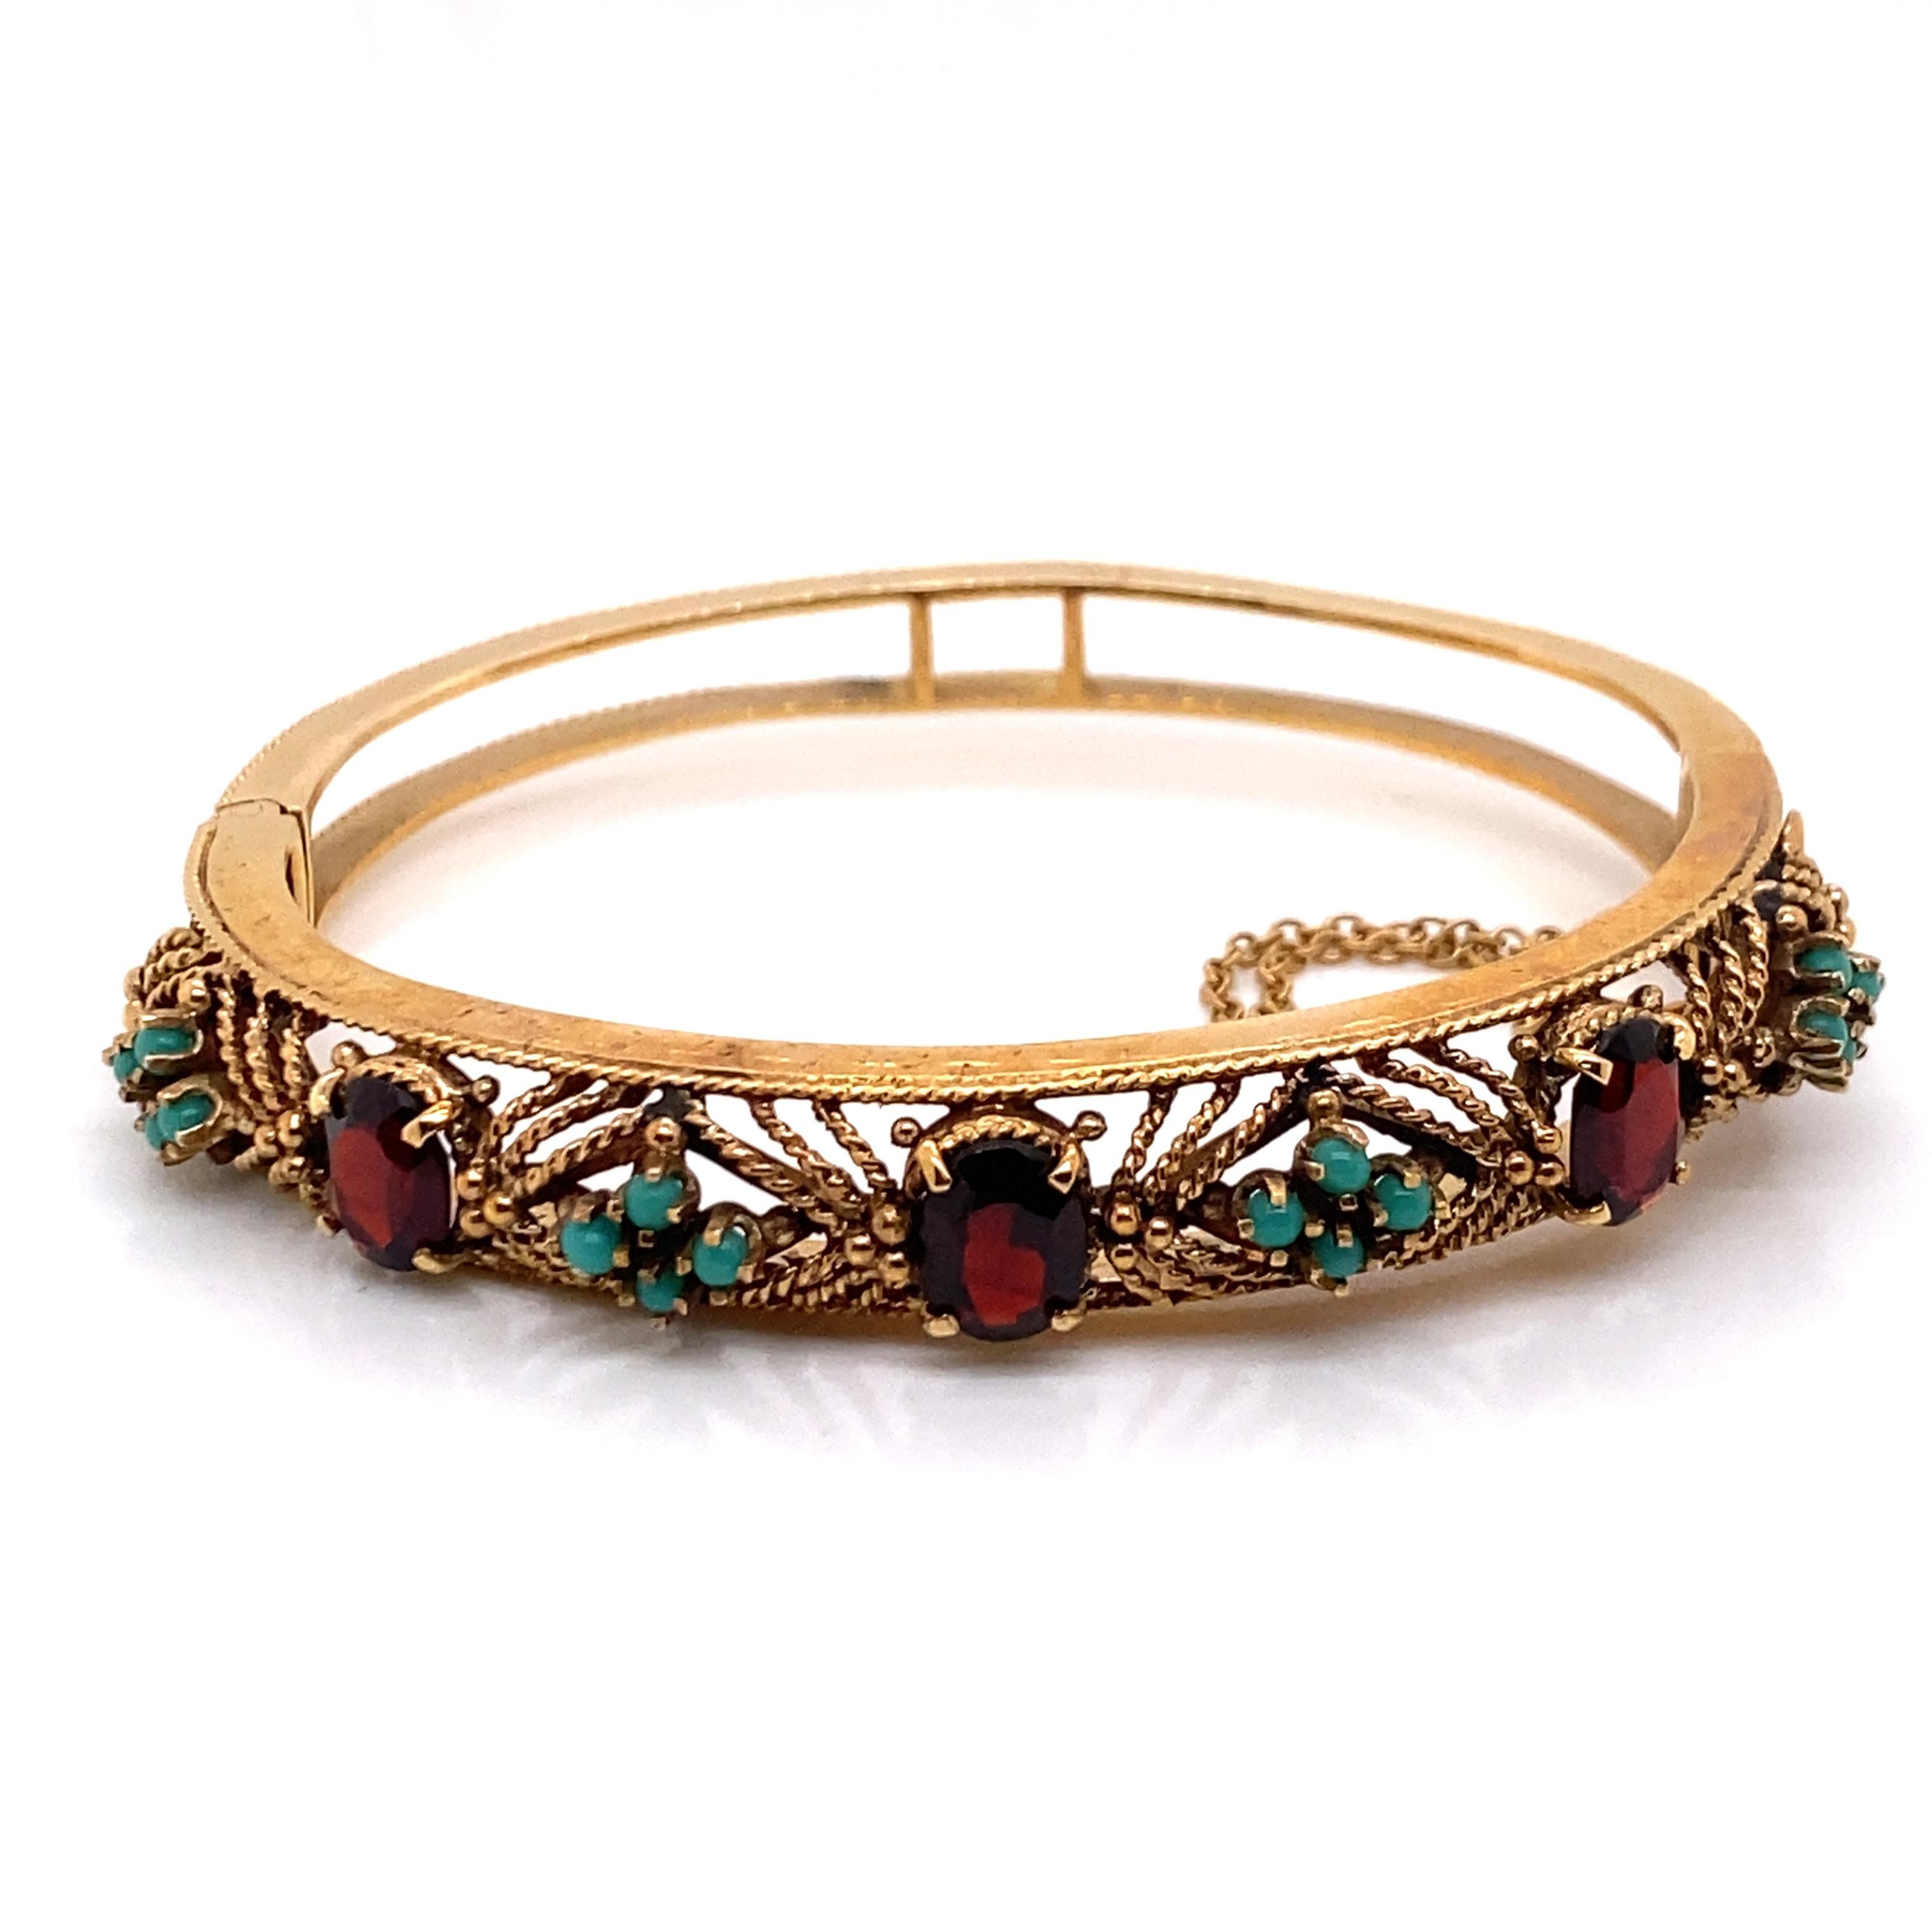 Vintage 1960's 14K Yellow Gold Bangle Bracelet with Garnet and Turquoise - The bangle contains 3 oval garnets 7.8 x 6mm and 16 turquoise beads which are prong set with filigree workmanship. The bangle width is .45 inches. The inside diameter is 1.85